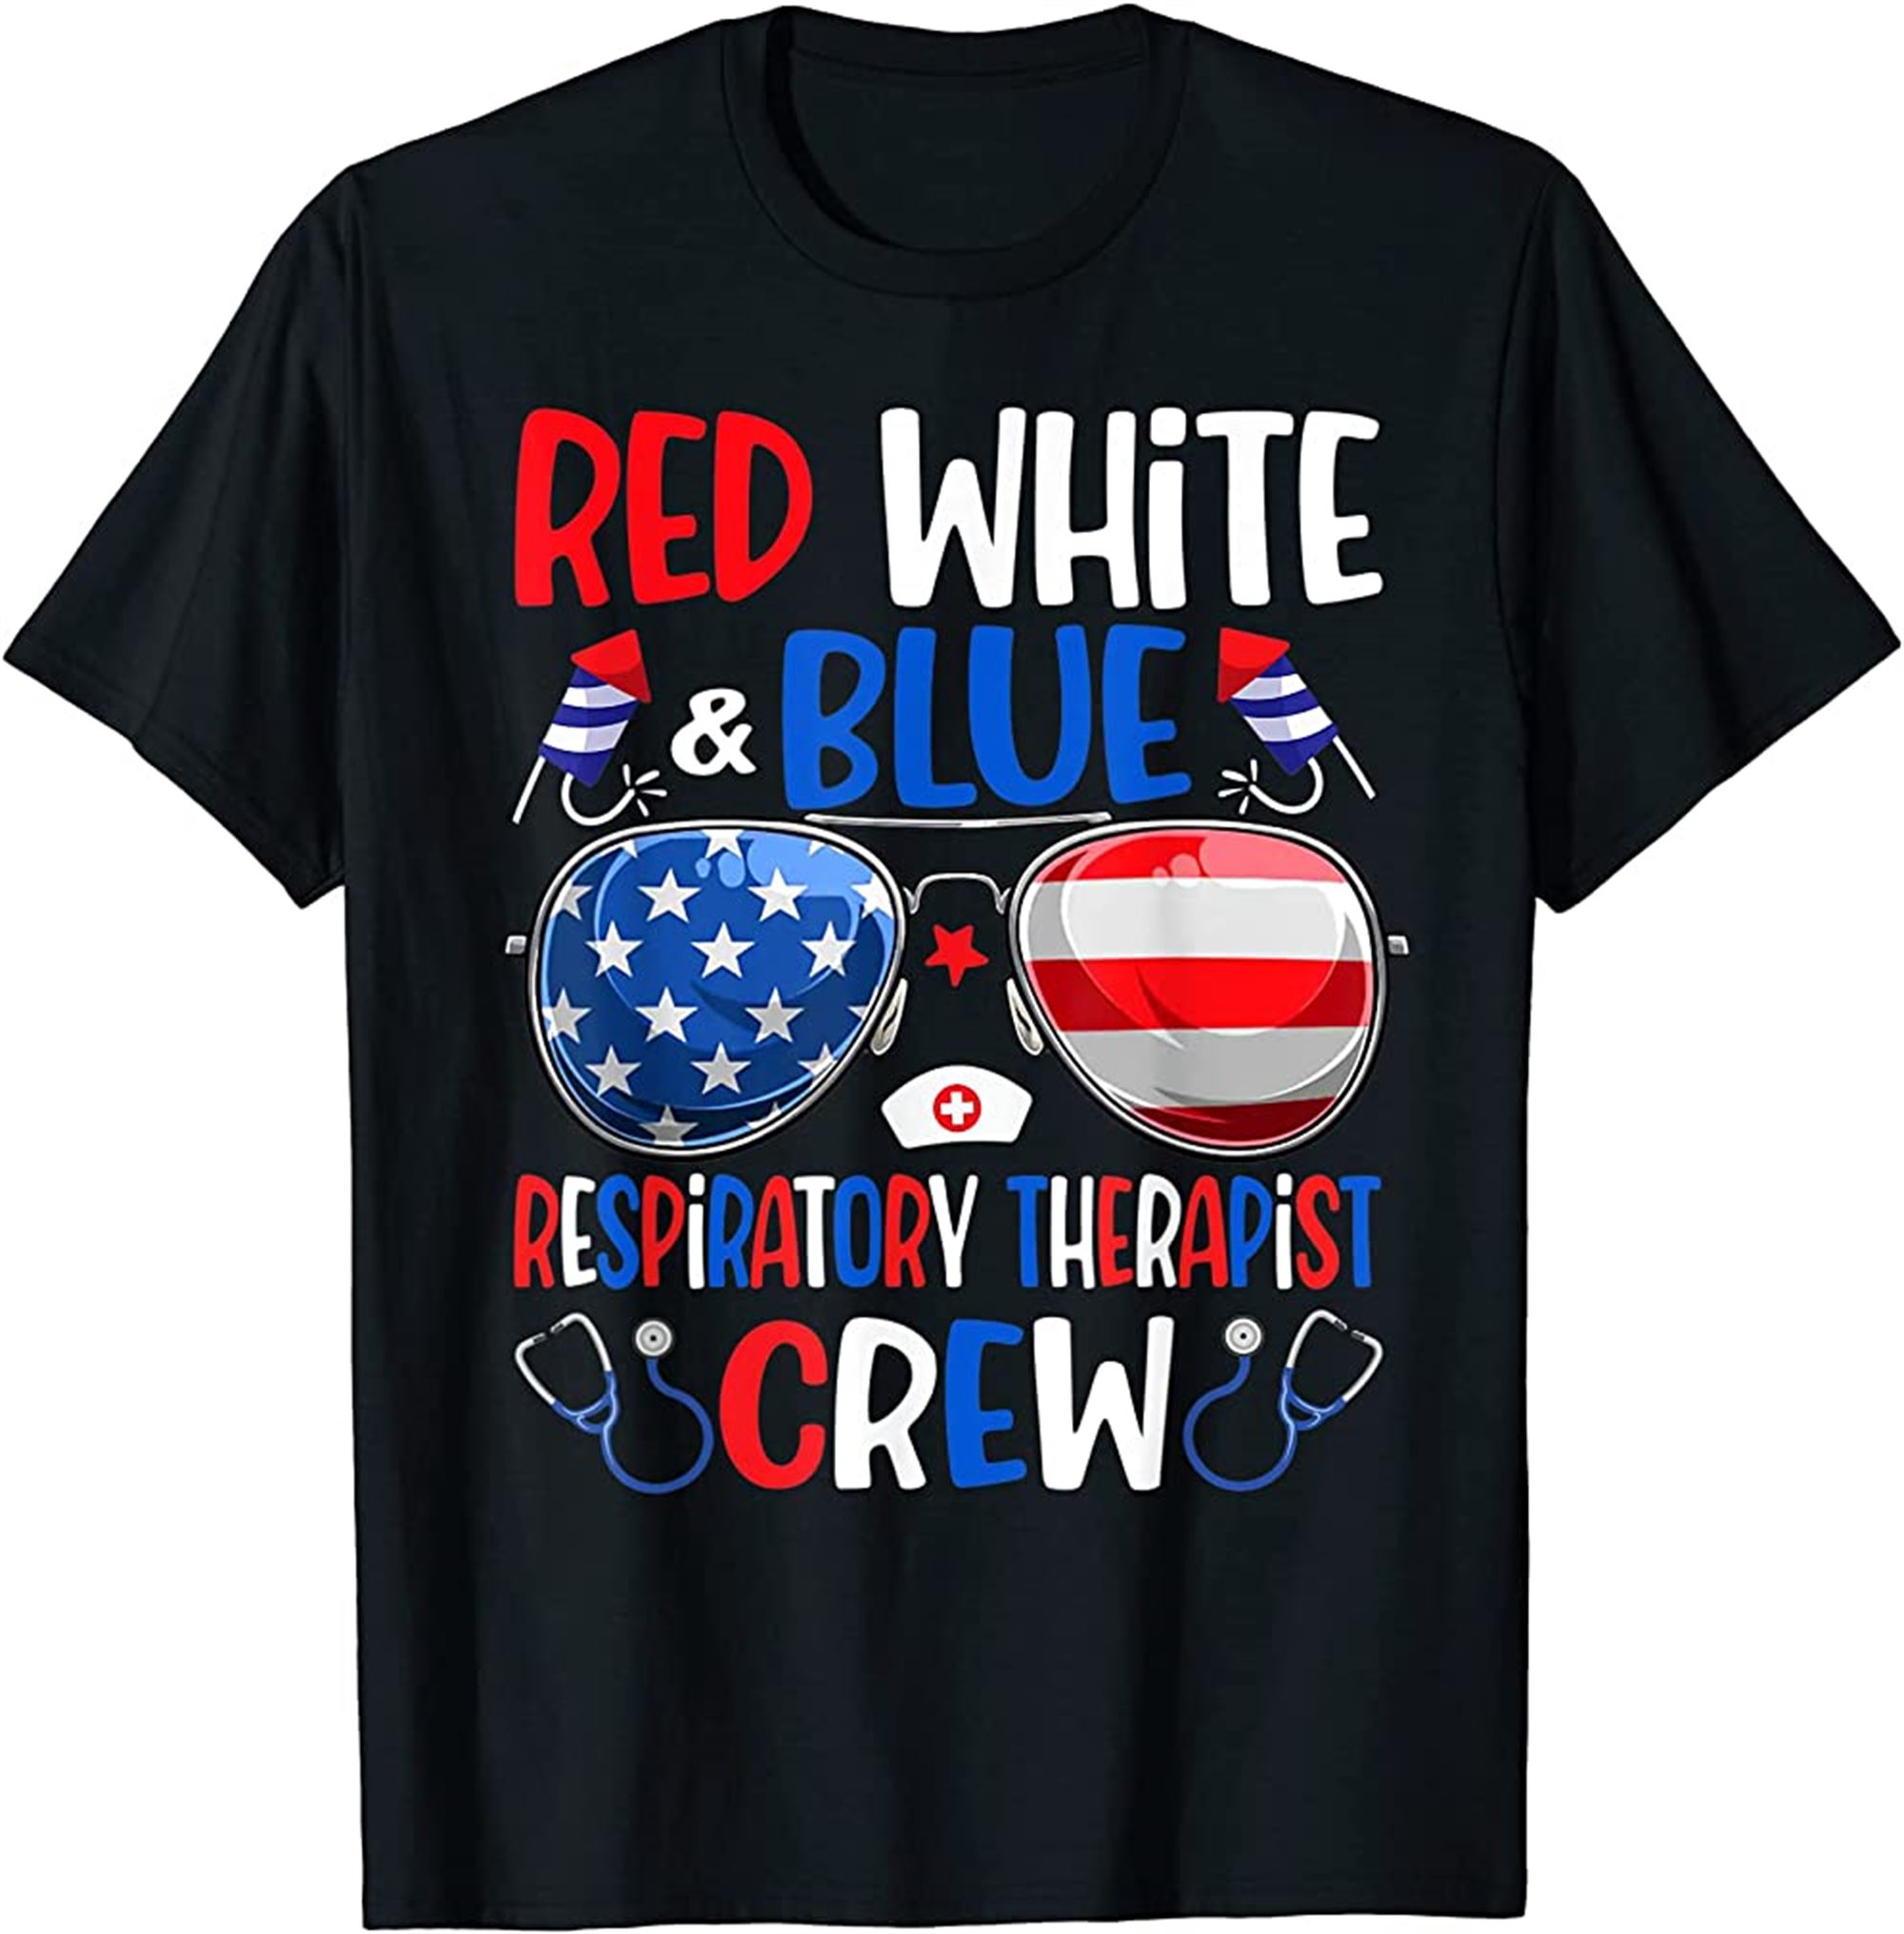 Red White Blue Respiratory Therapist Crew 4th Of July T-shirt Plus Size Up To 5xl